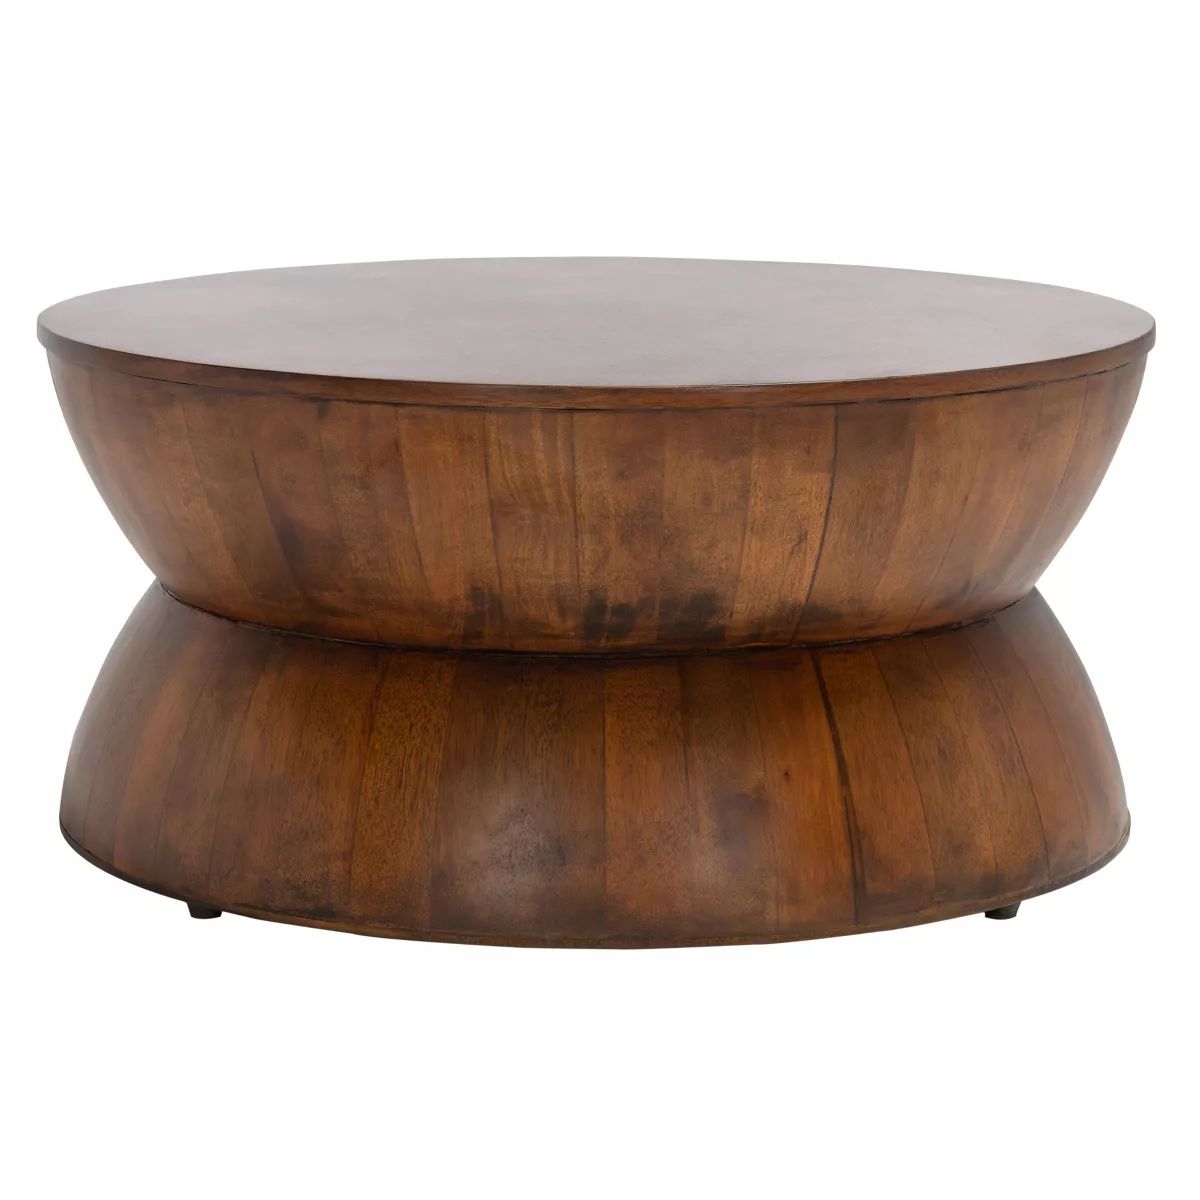 Alecto Round Coffee Table - Brown - Safavieh. | Target